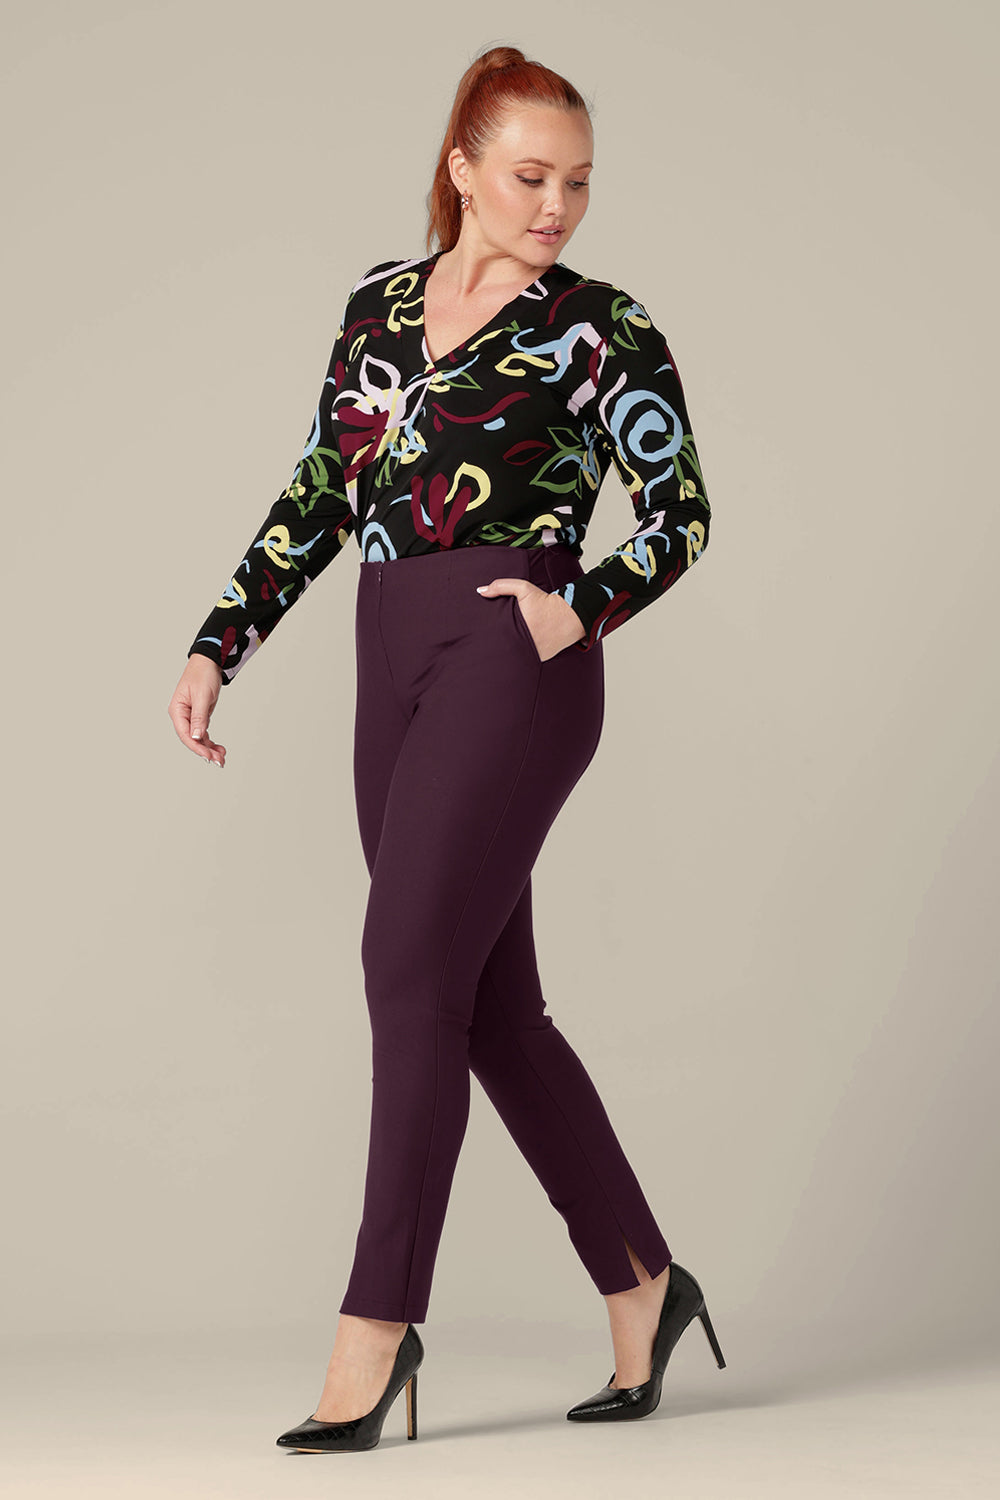 A size 12 woman wears mid-rise, slim leg pants in mulberry ponte jersey by Australia and New Zealand women's clothing label, L&F. Good workwear pants, these comfortable trousers are made for an inclusive size range of sizes 8 to 24.